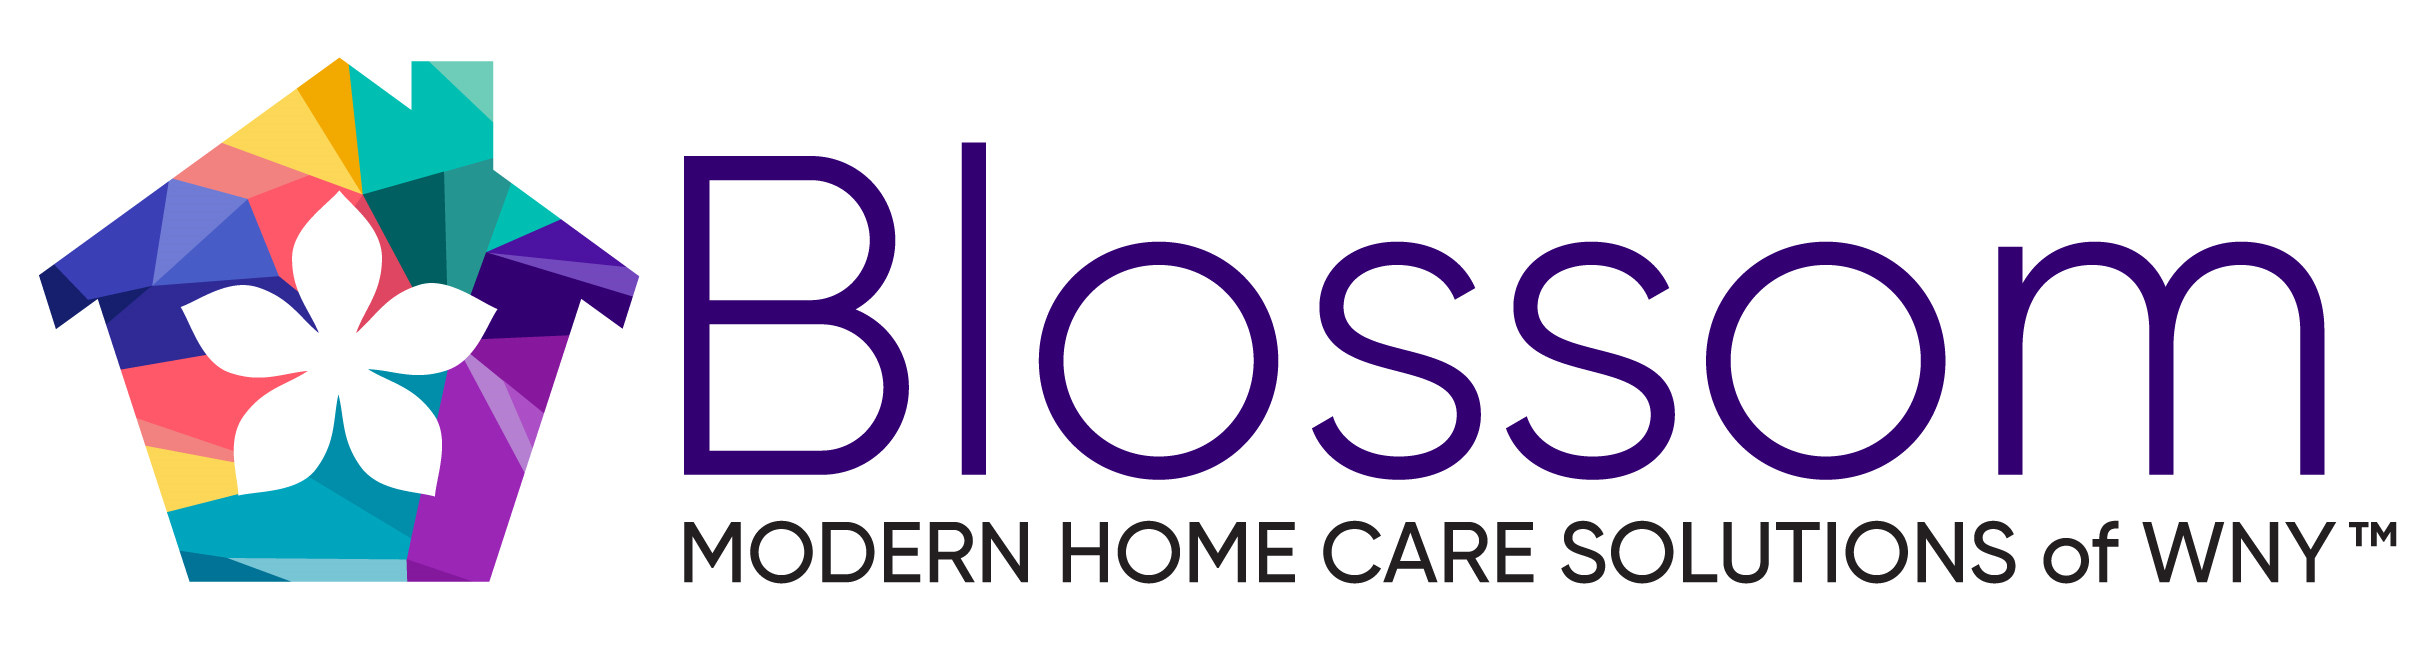 Blossom: Modern Home Care Solutions of Western New York logo